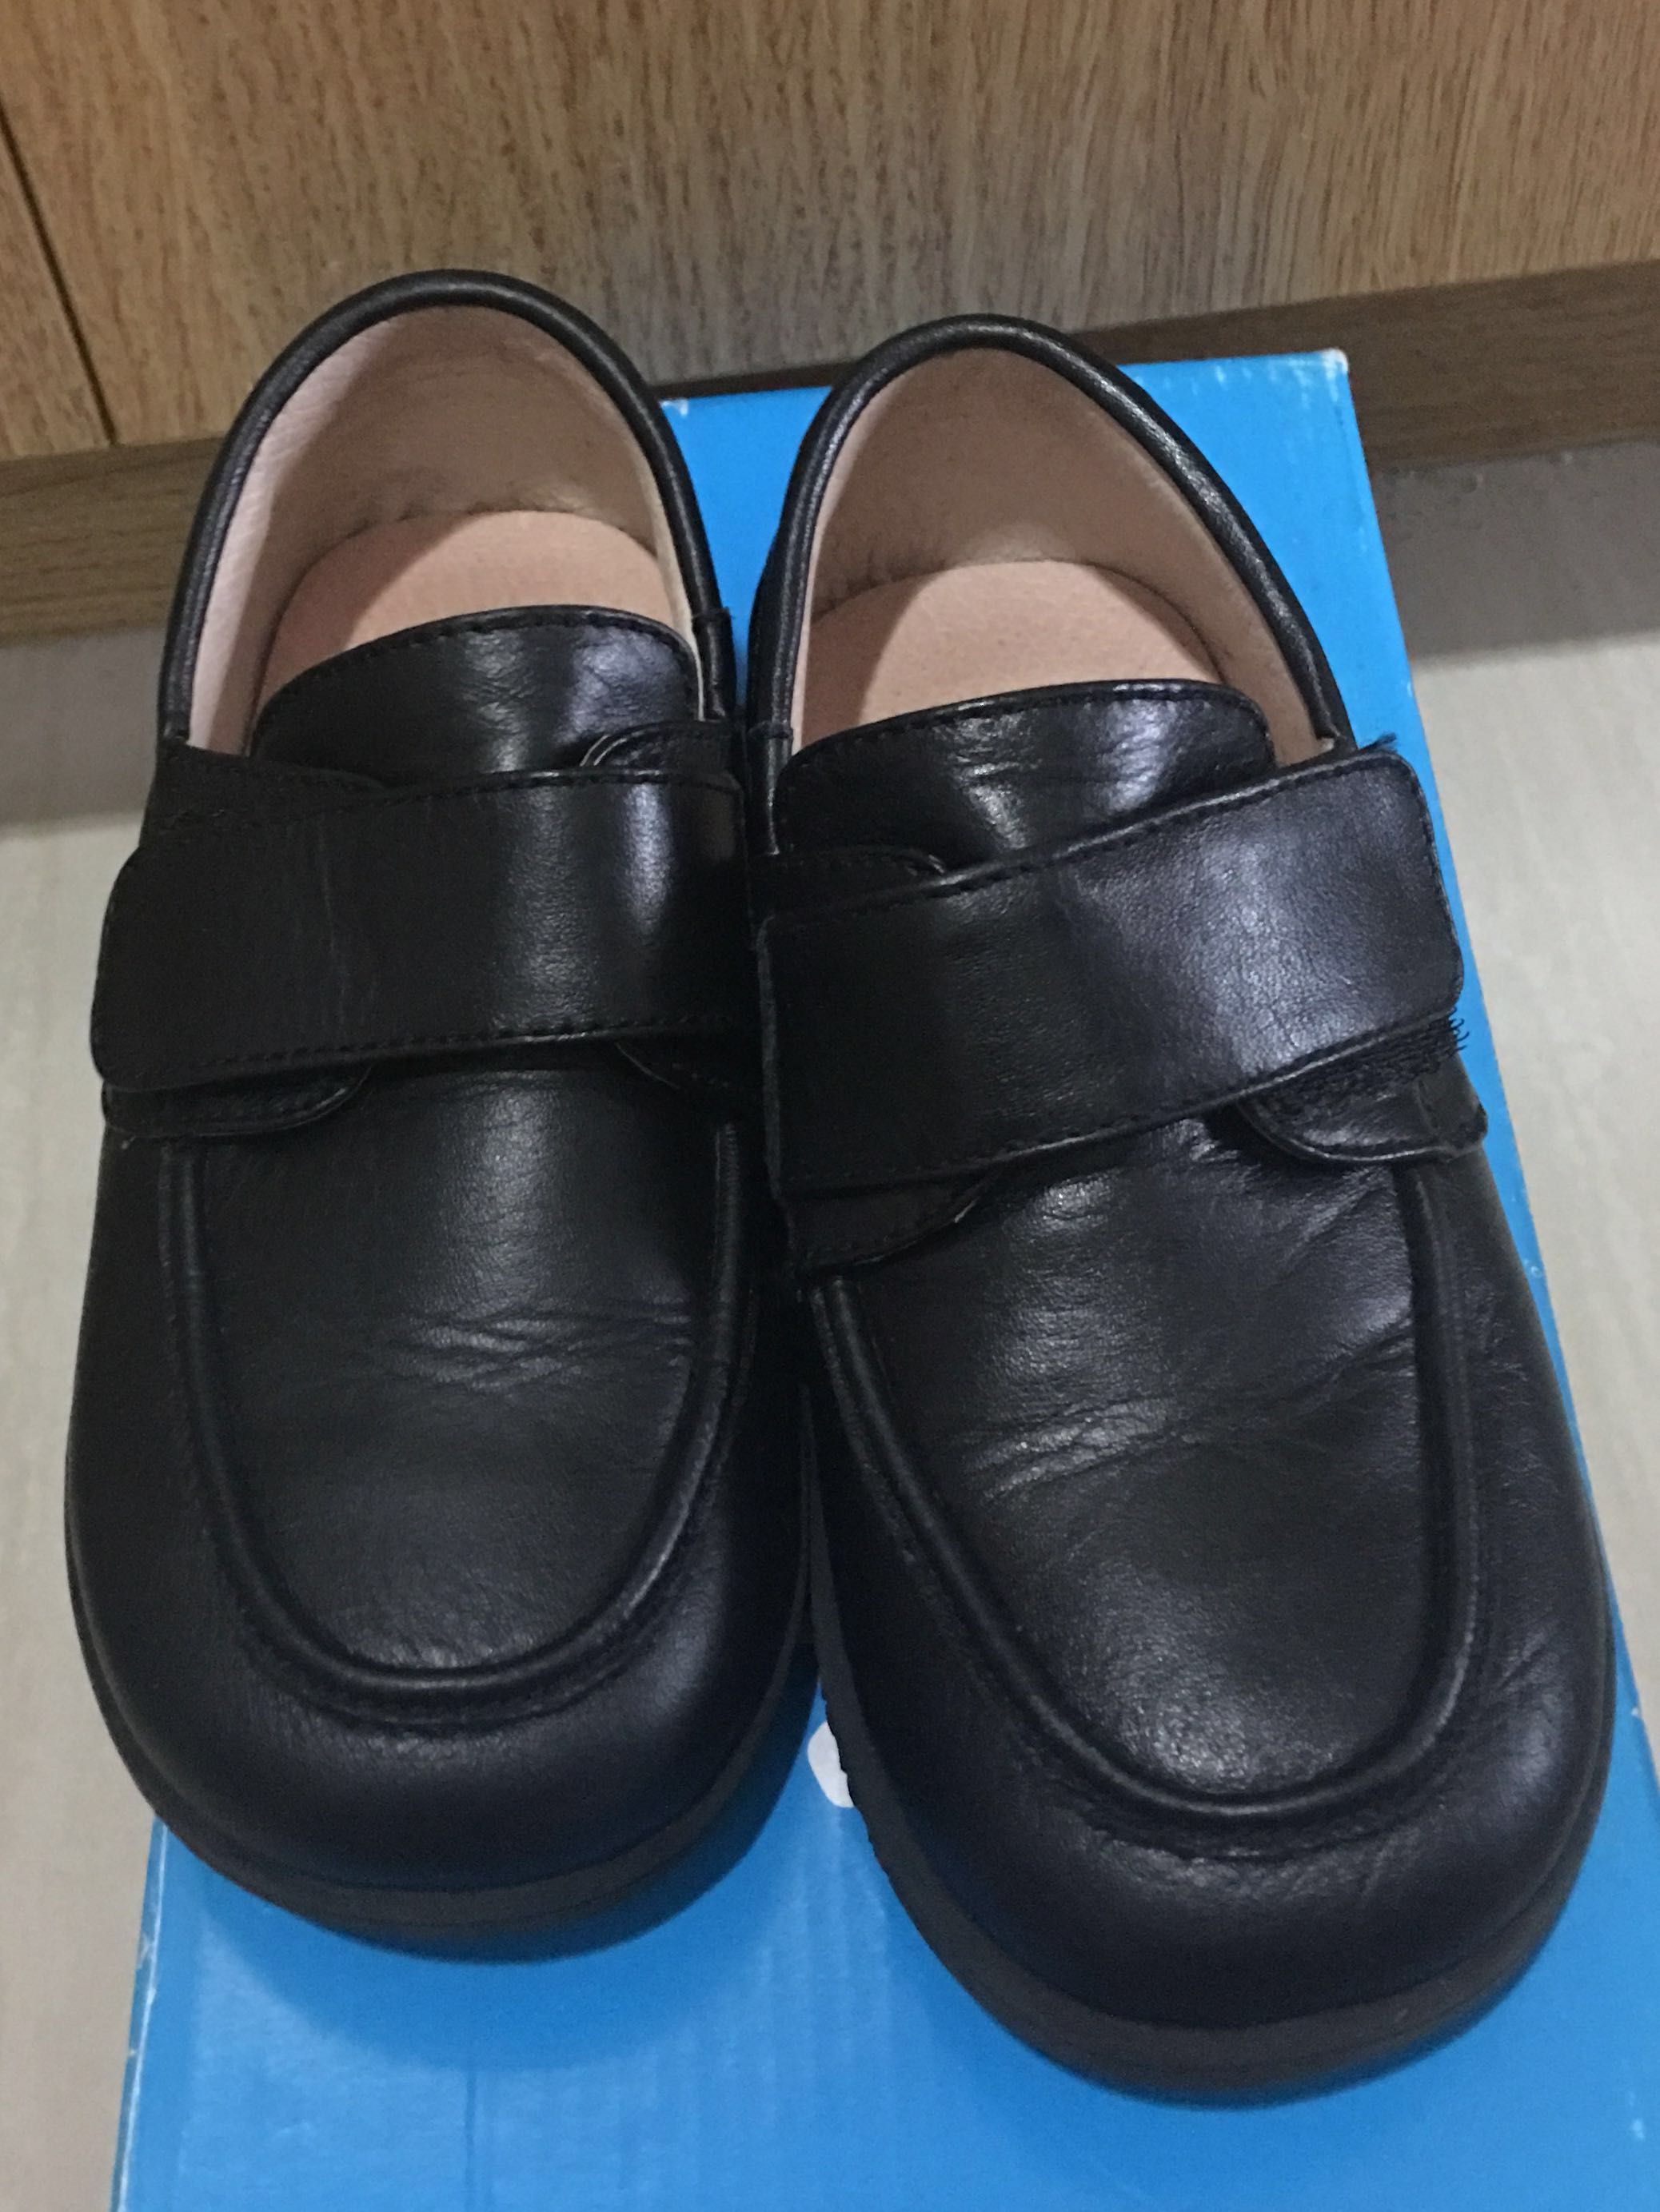 youth boys school shoes